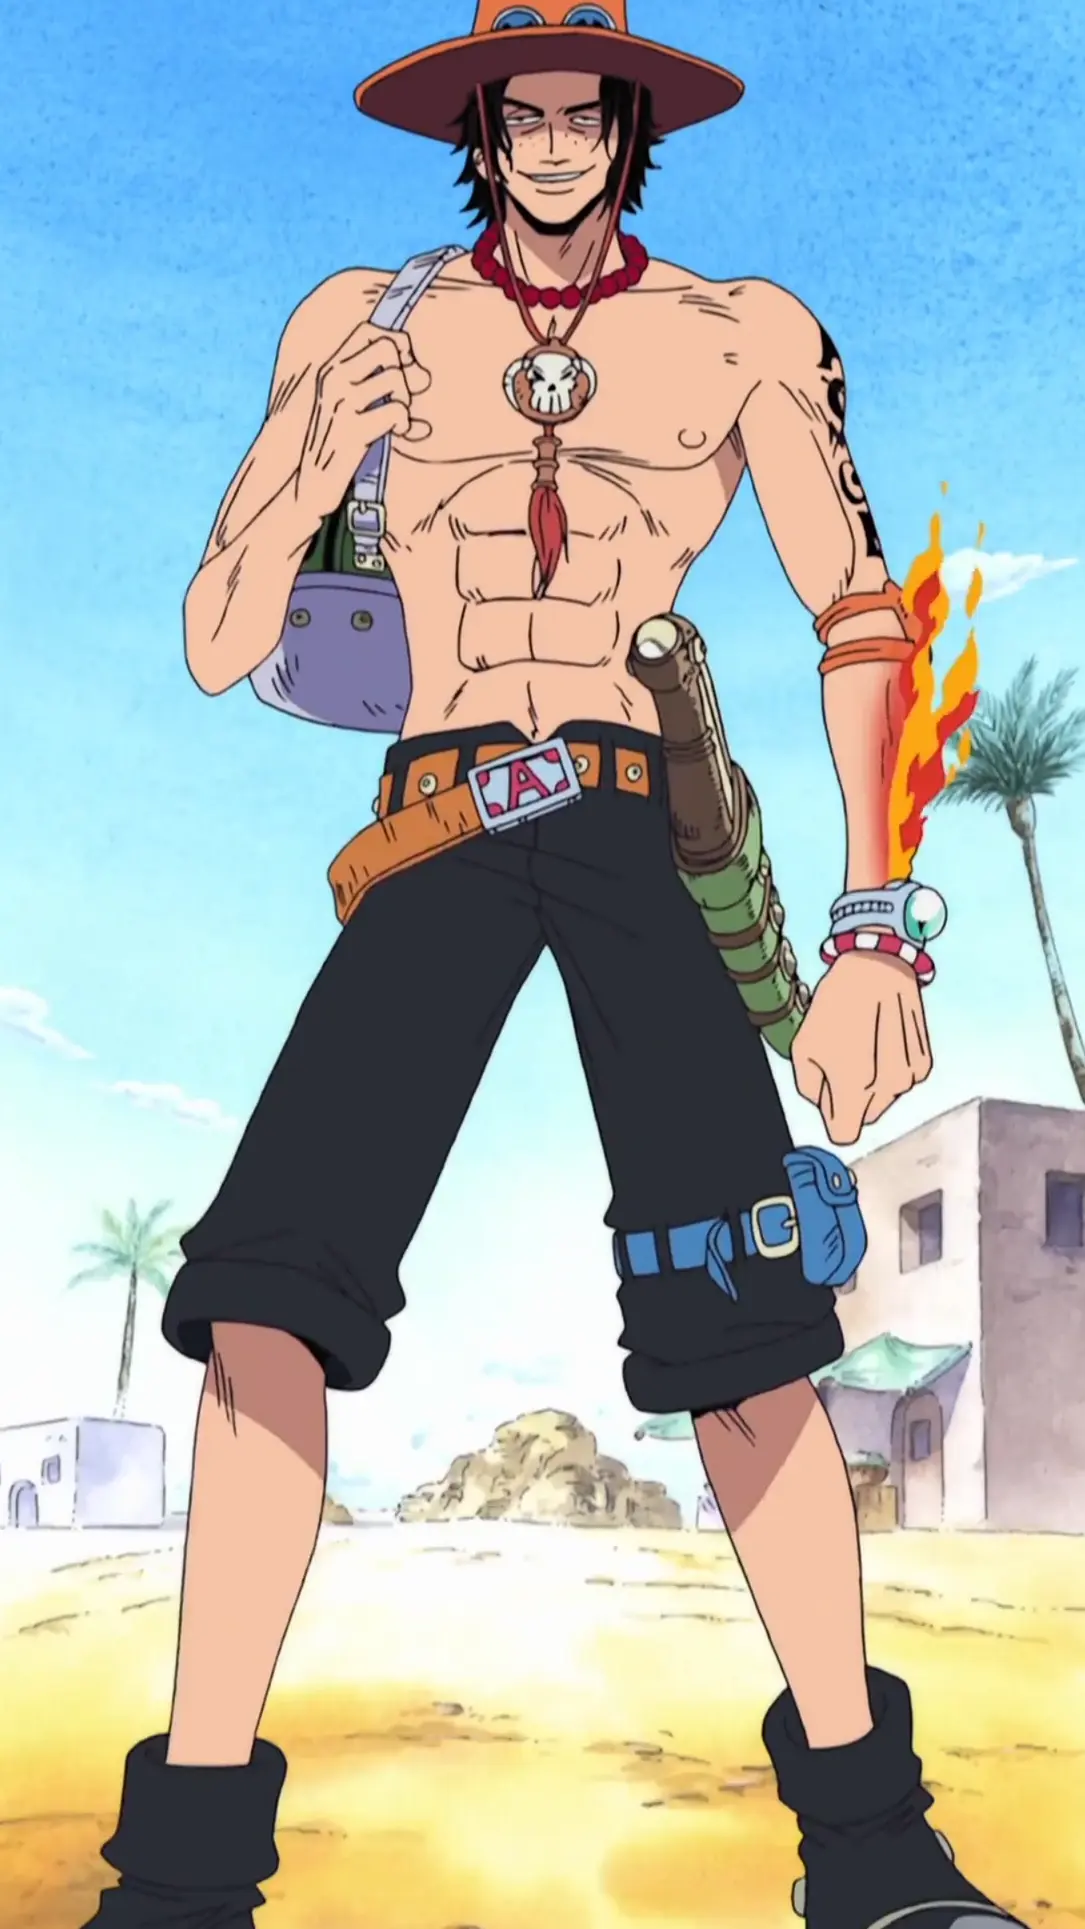 david witherall recommends Pictures Of One Piece Characters